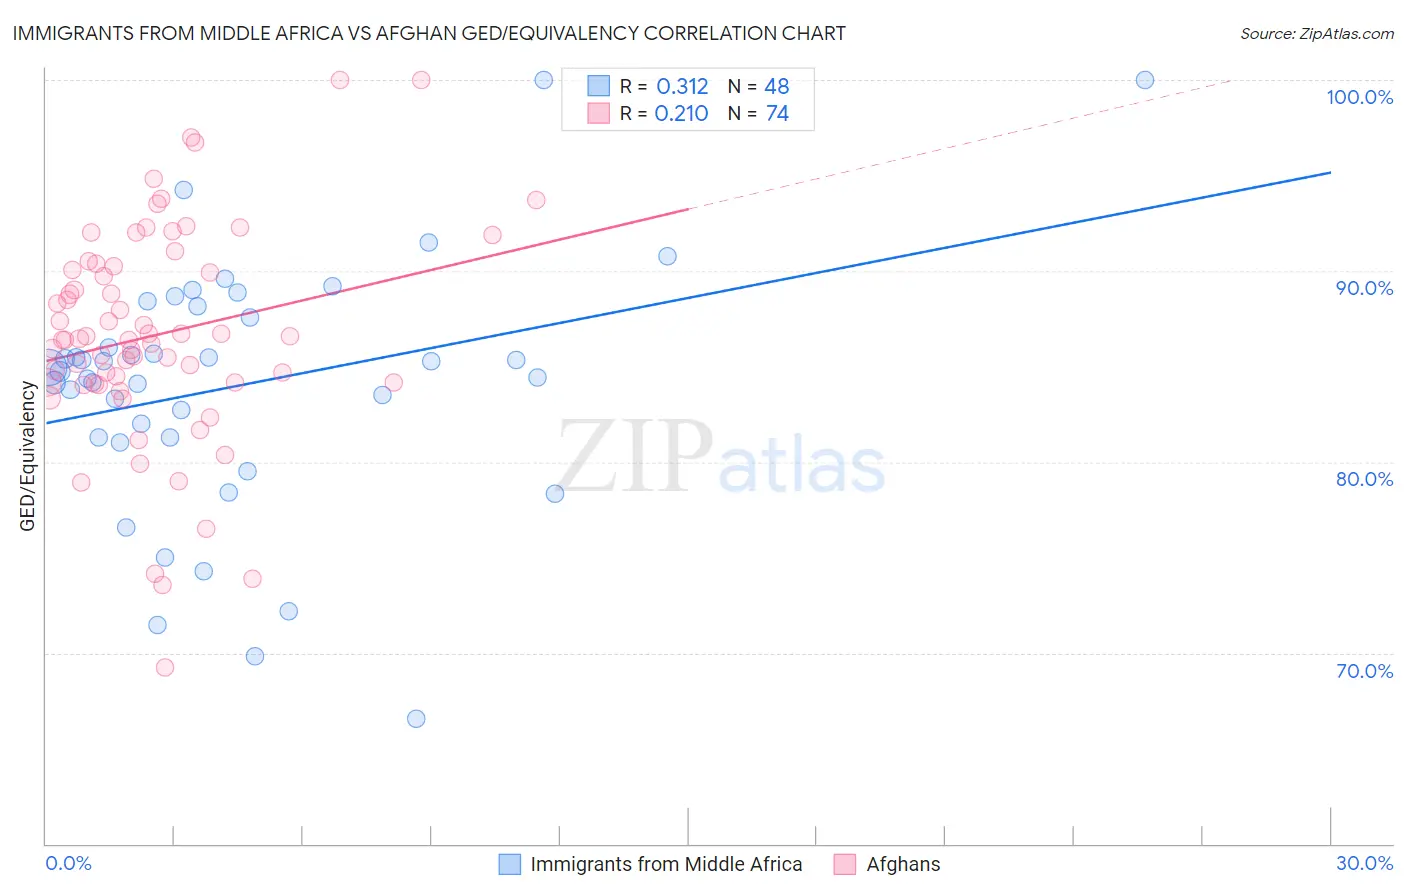 Immigrants from Middle Africa vs Afghan GED/Equivalency